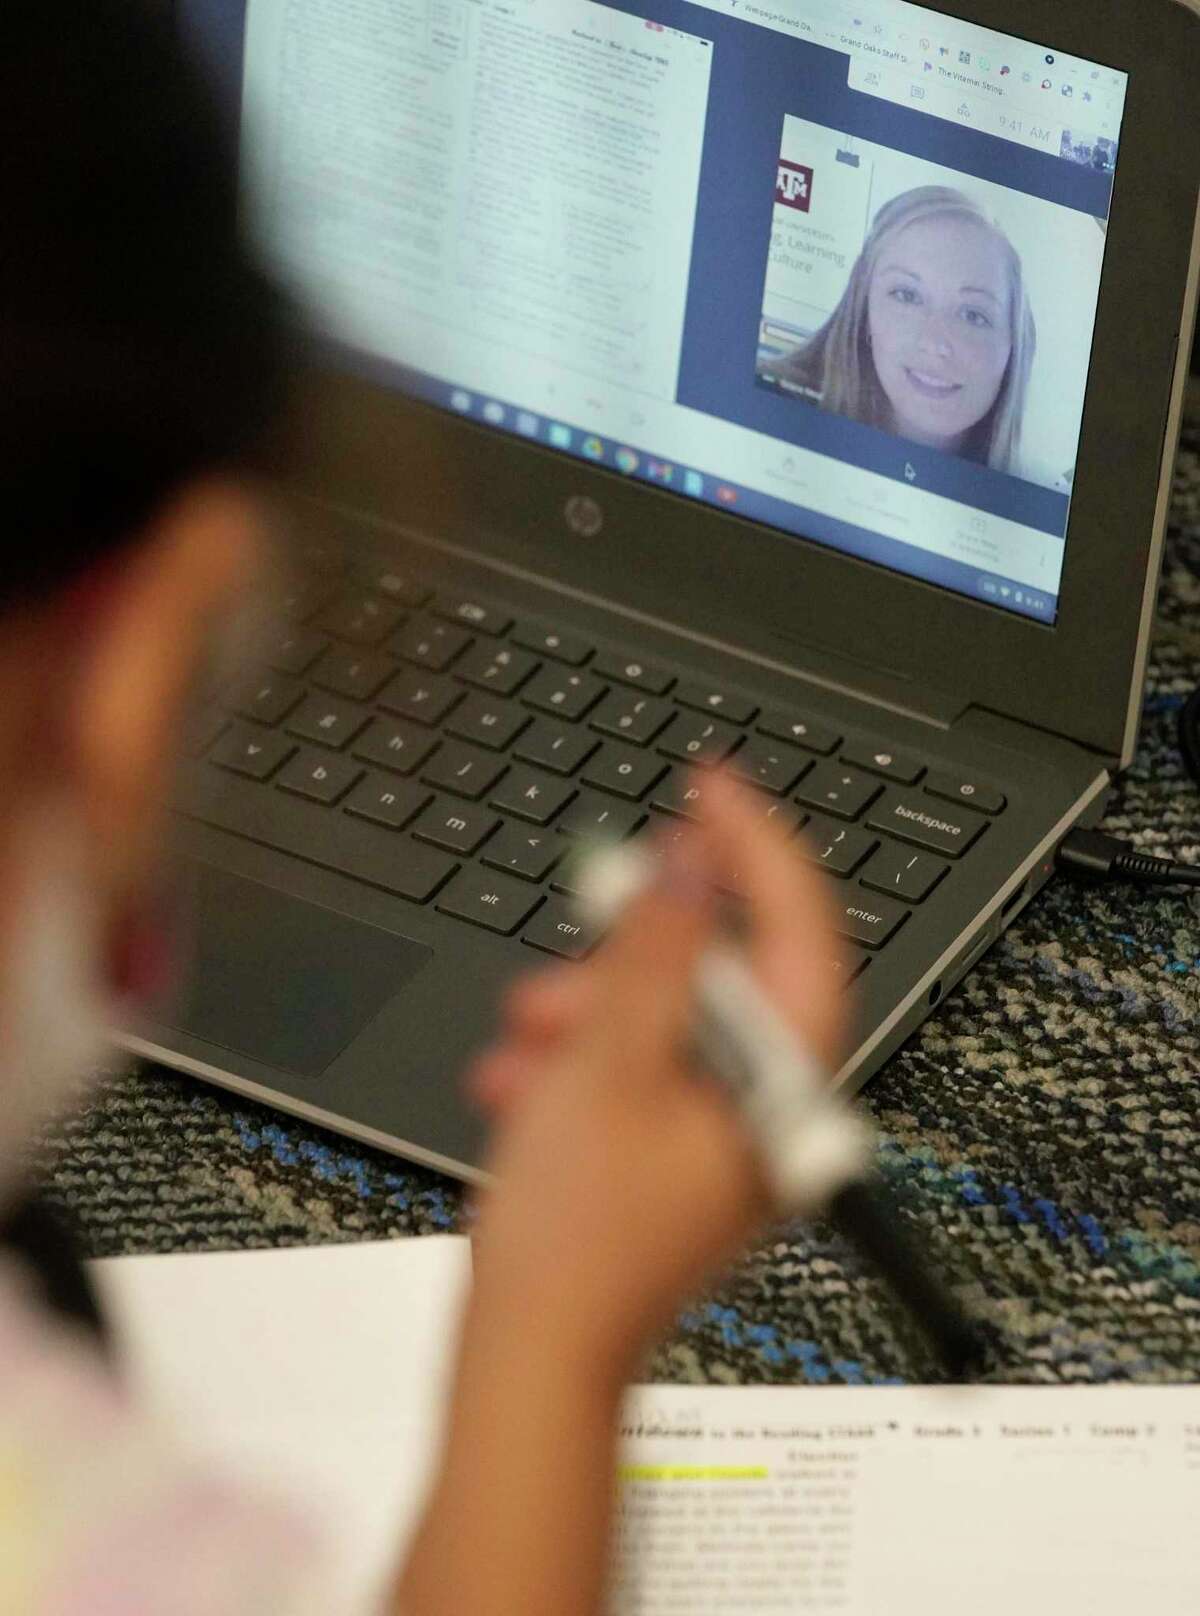 Jennifer Rosa, 8, participates in a virtual session with Texas A&M senior Grace Neal during their class at Grand Oaks Elementary School, 20241 Cypress Rosehill Rd., Thursday, March 25, 2021 in Tomball. Neal is one of dozens of seniors in Texas A&M's College of Education who have been streamed into Tomball ISD's classrooms this year. Teachers set up a laptop so the soon-to-be educators can work with students in small groups or one on one.